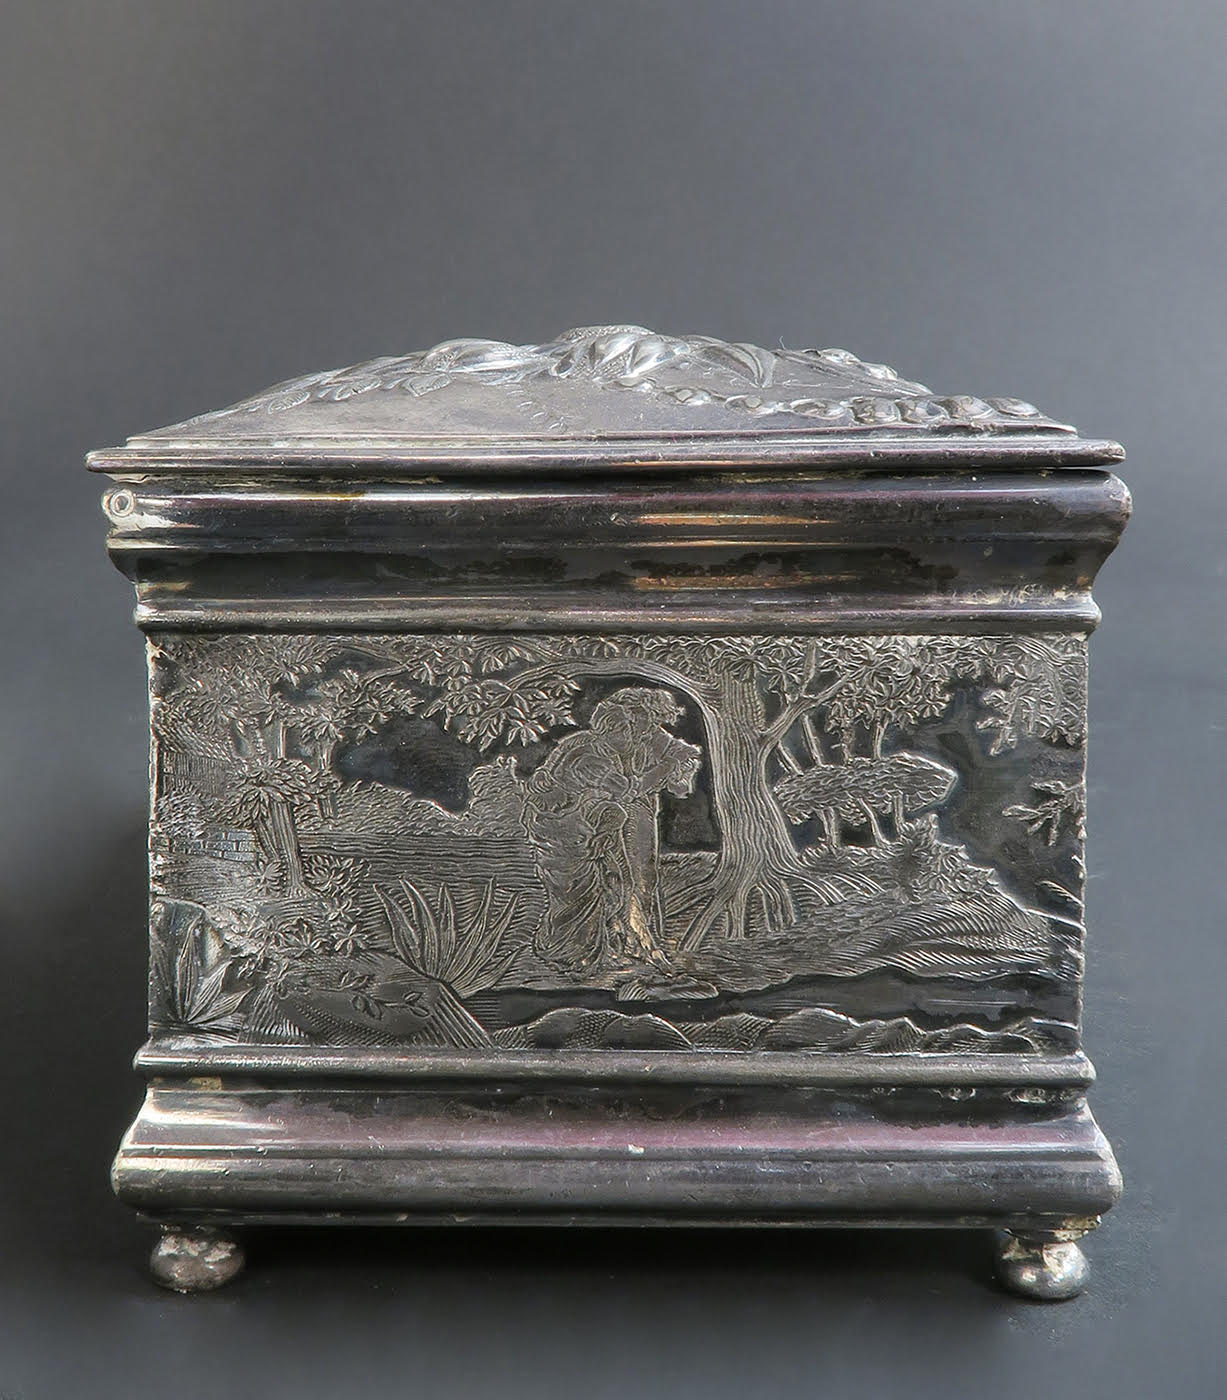 Fine 19th C. Silver-Plated Jewelry Box - Image 11 of 14